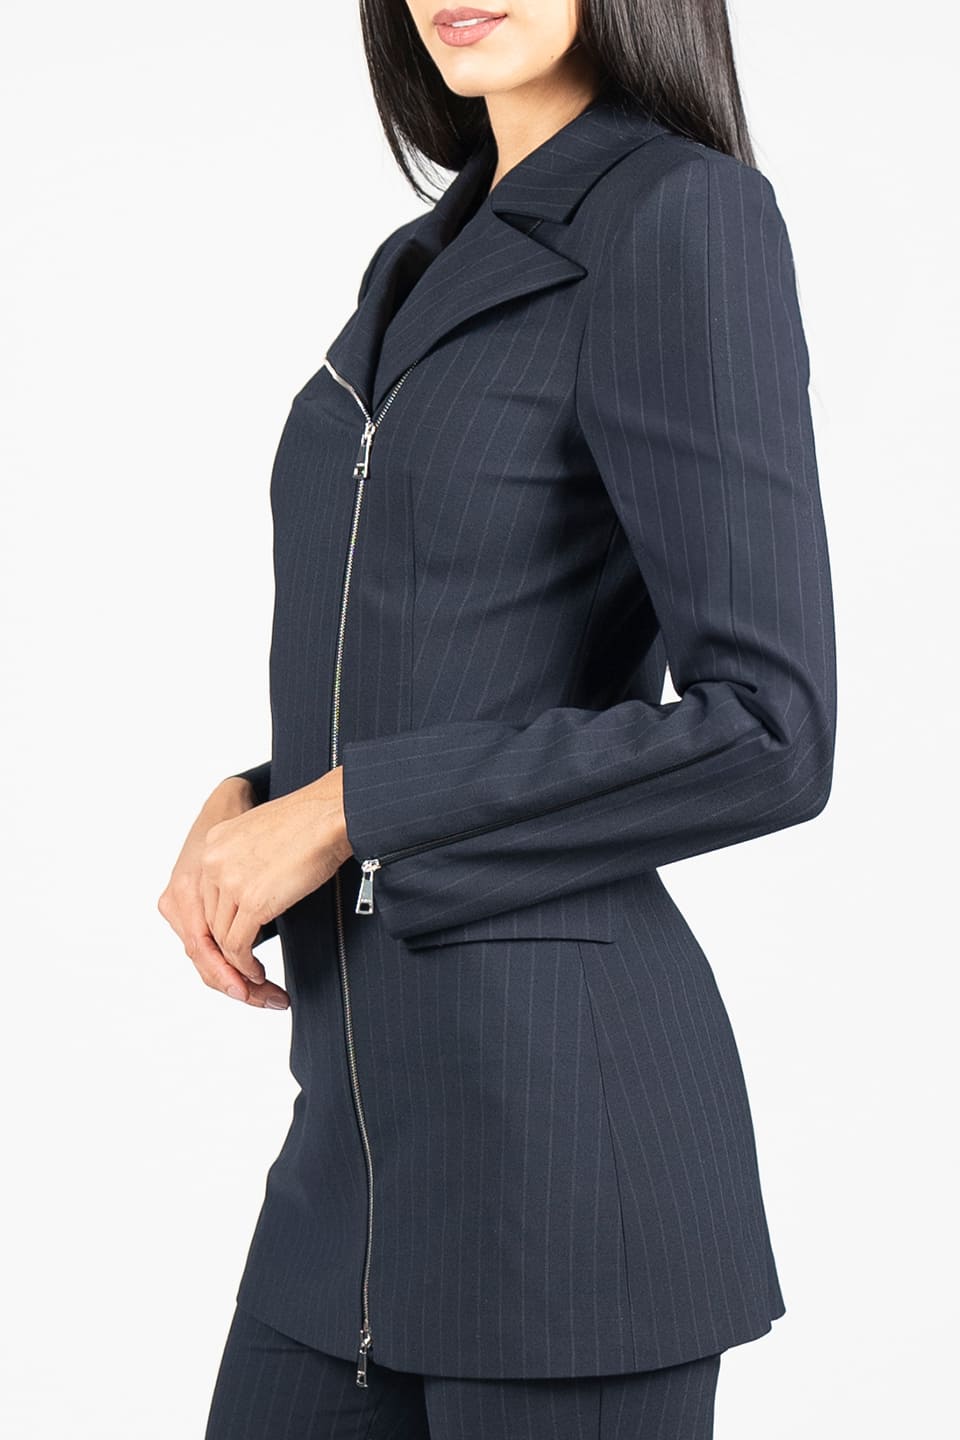 Designer Blue Women blazers, shop online with free delivery in UAE. Product gallery 5